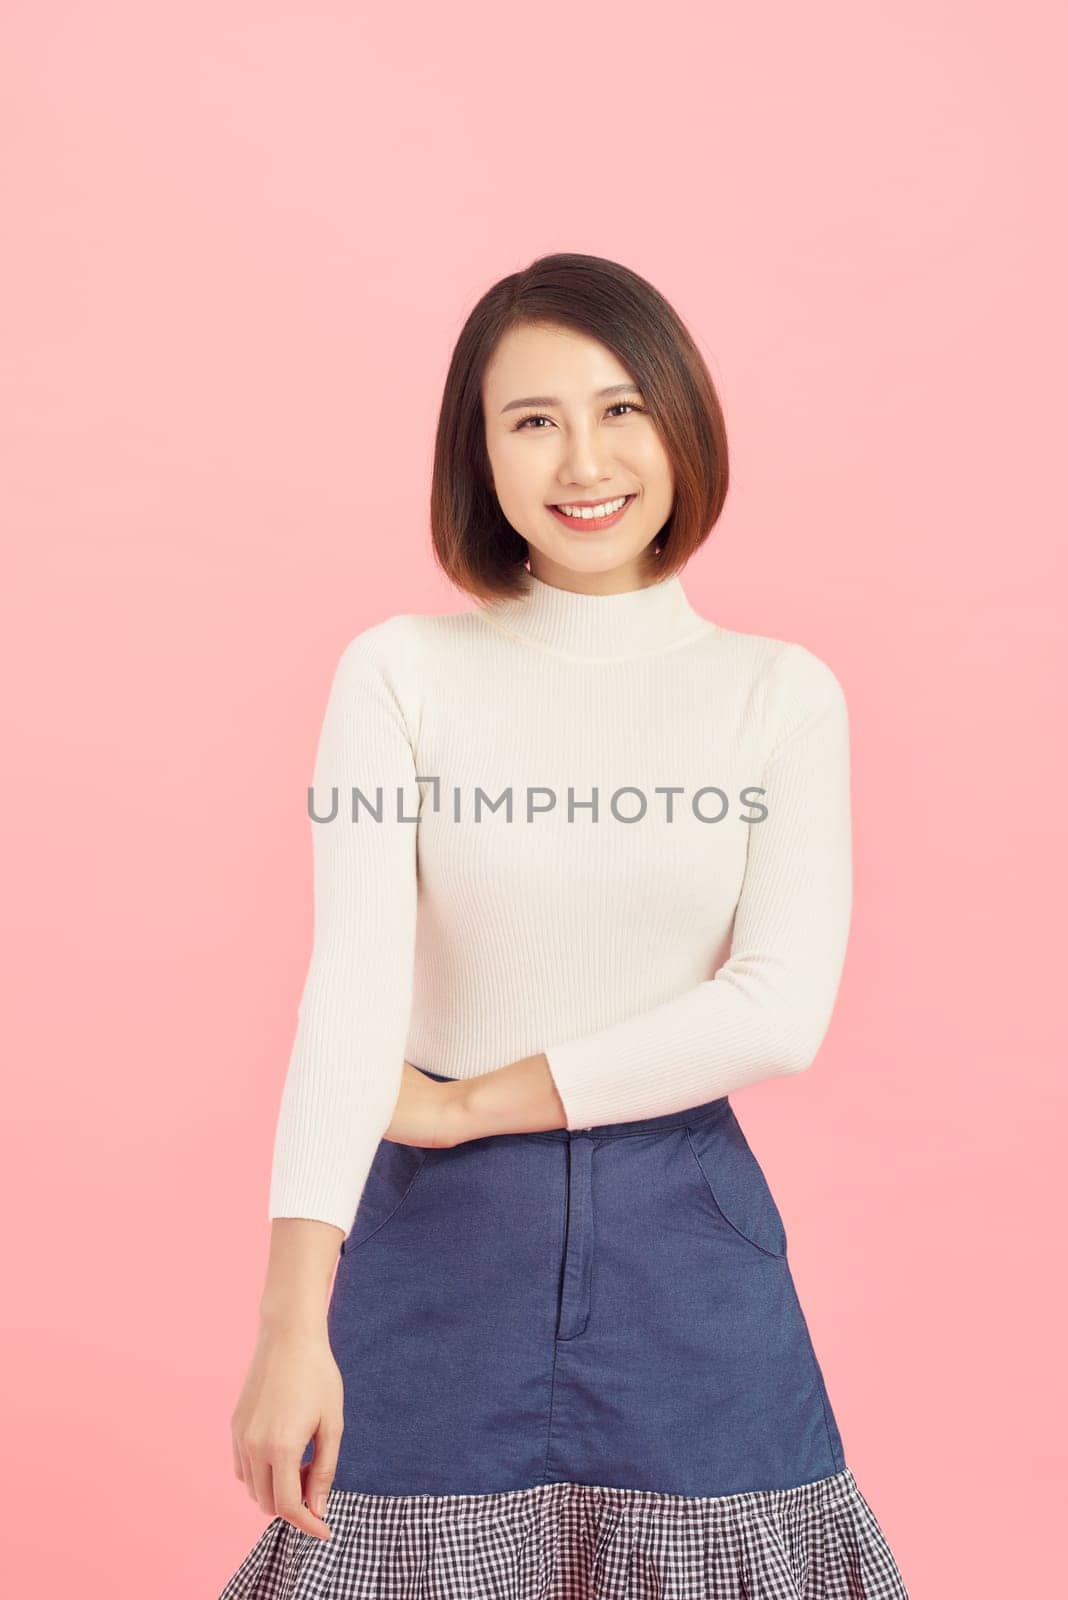 Portrait of smiling Asian woman standing isolated on pink background.